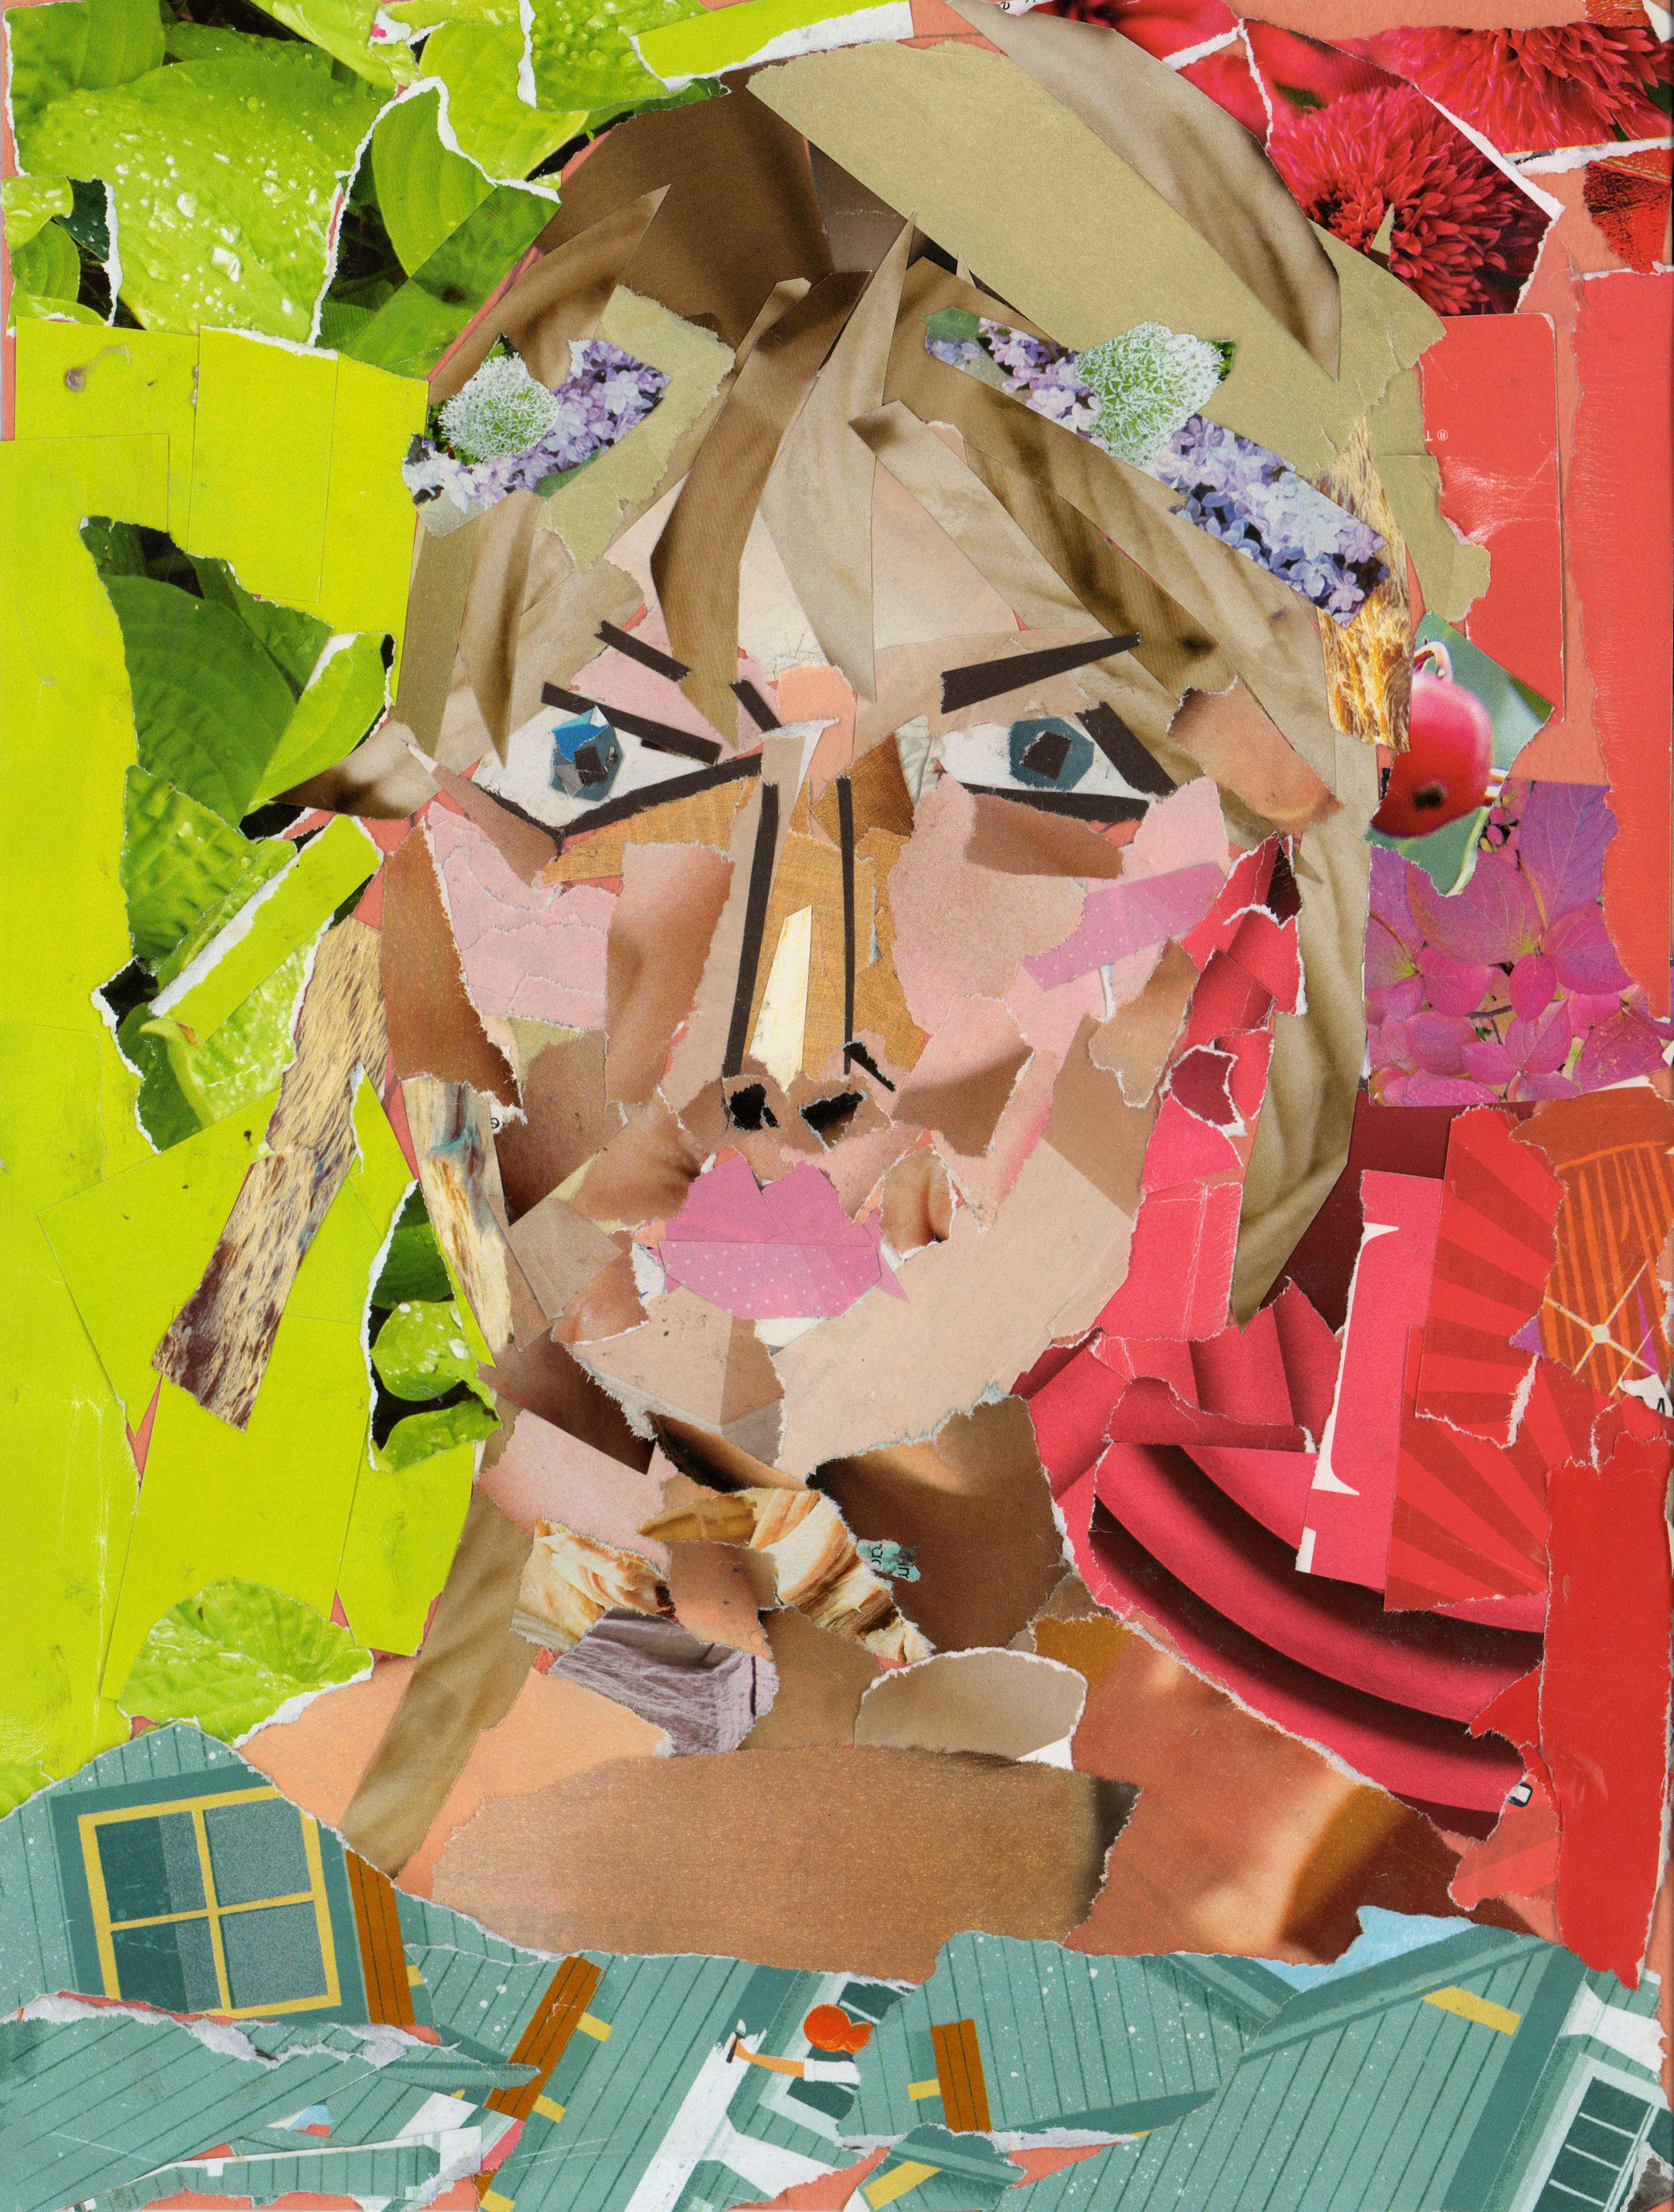 Collage portrait of a blond-haired, blue-eyed female staring intensely at the viewer created with vintage magazines and wallpaper. The subject has black eyebrows, black eyeliner, and pink lips. The subject's face and neck are copmposed entirely of scraps torn from the pages of magazines. To the woman's left, the background is lime green. To her right, the background is a warm red. She wears a foam green shirt that comes up to her shoulder line.